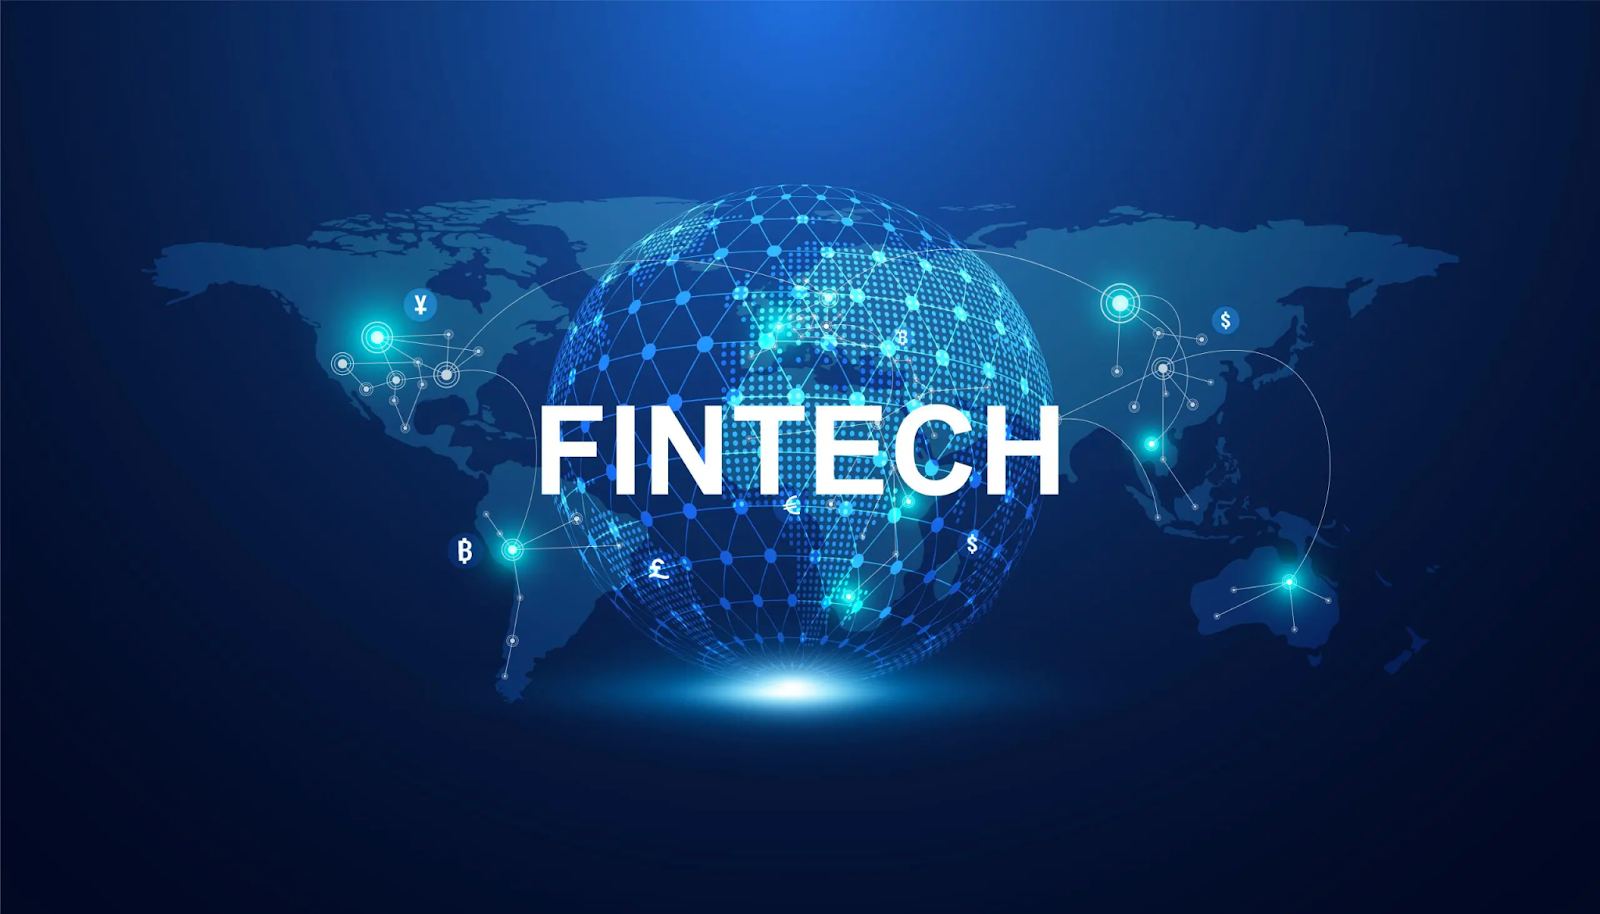 Top 5 fintech solution companies in APAC